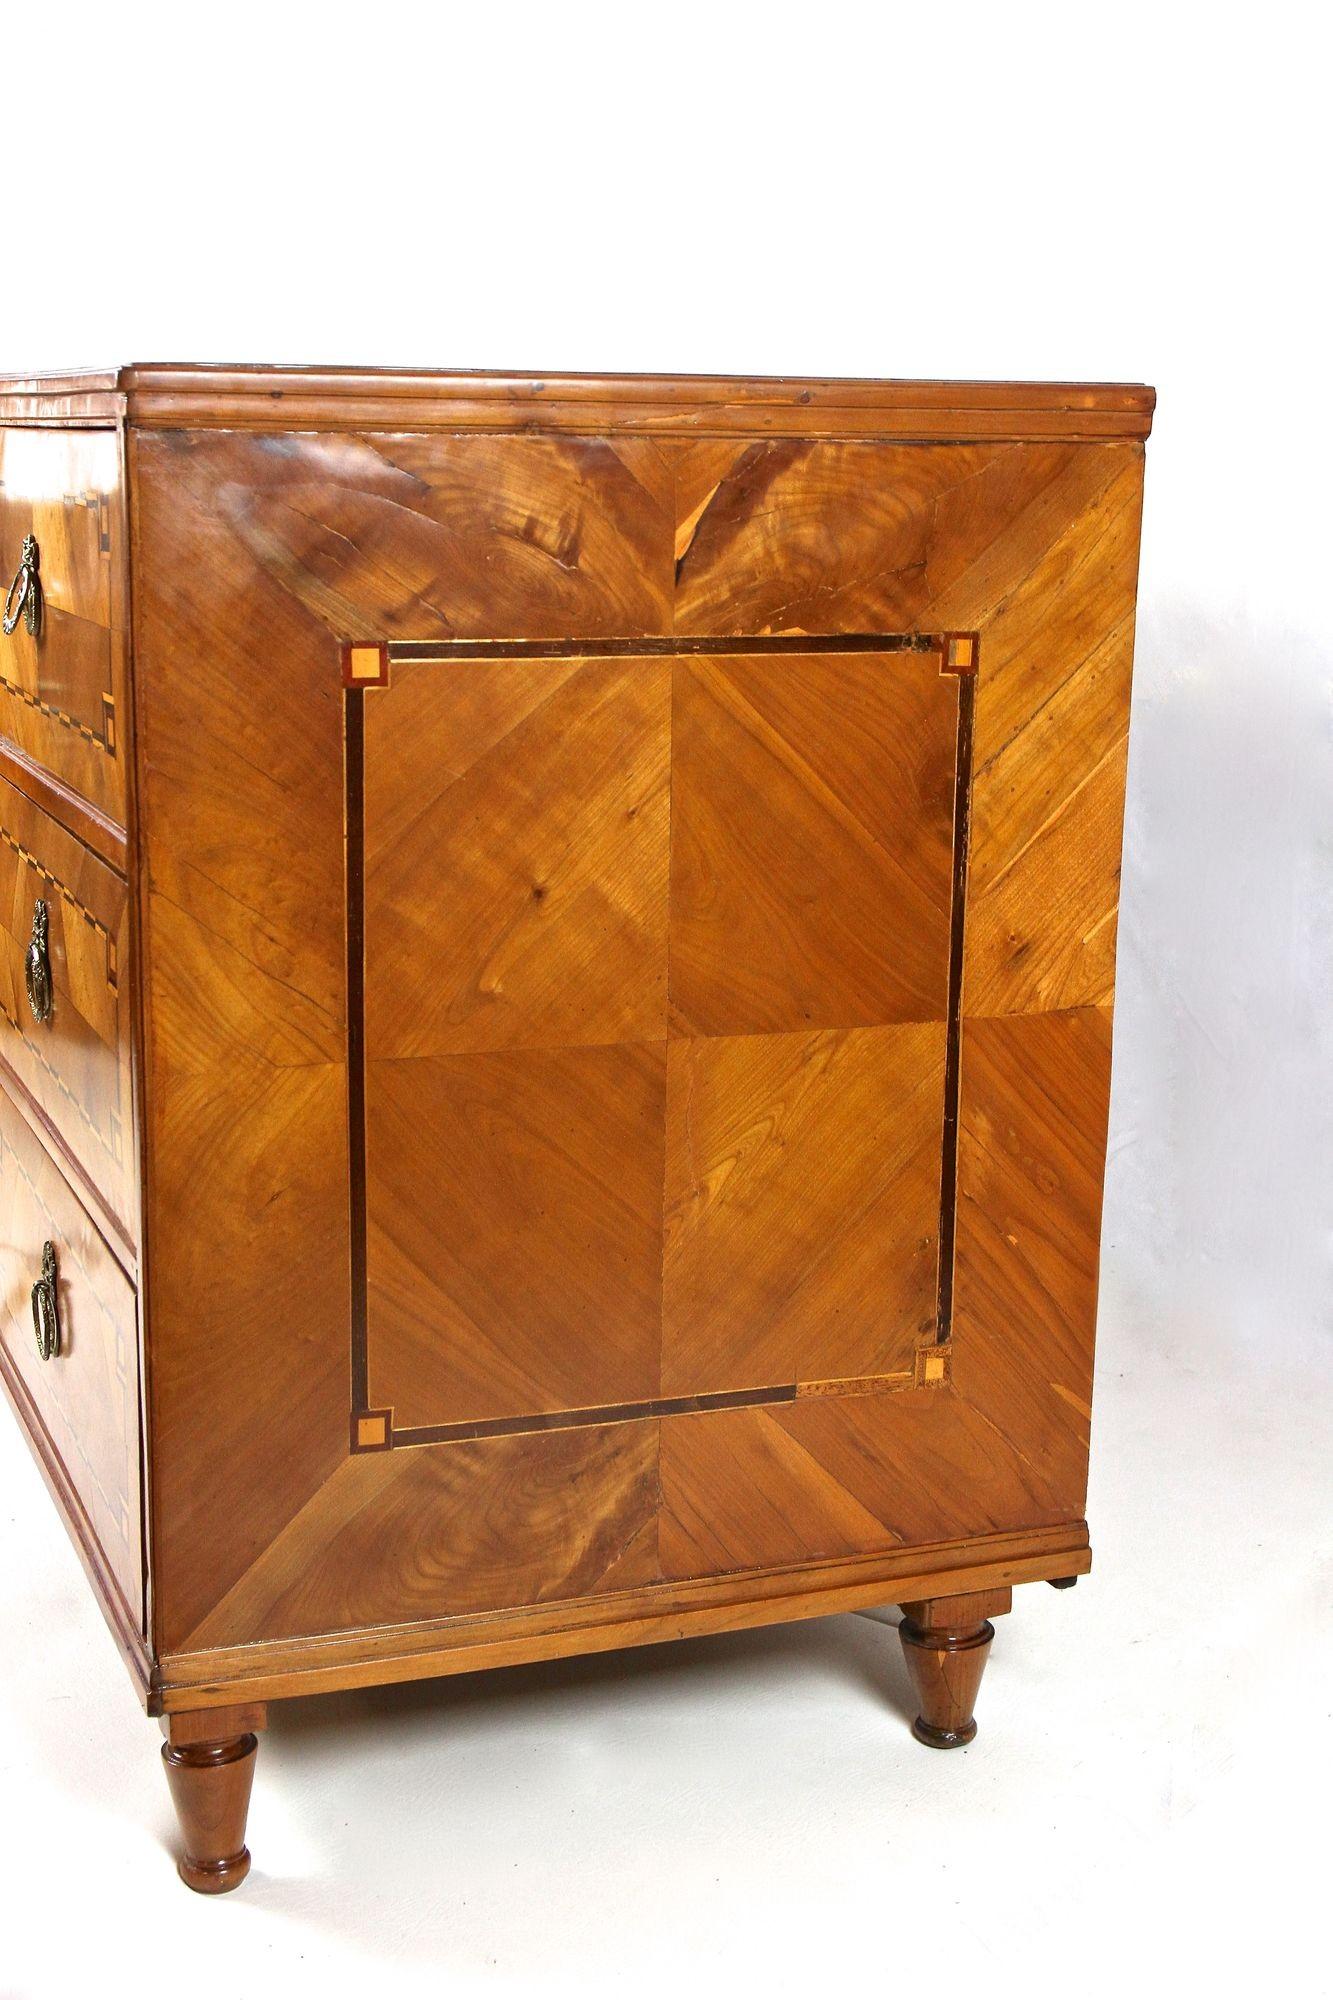 18th Century Cherrywood Chest of Drawers, Josephinism Period, Austria circa 1790 For Sale 5